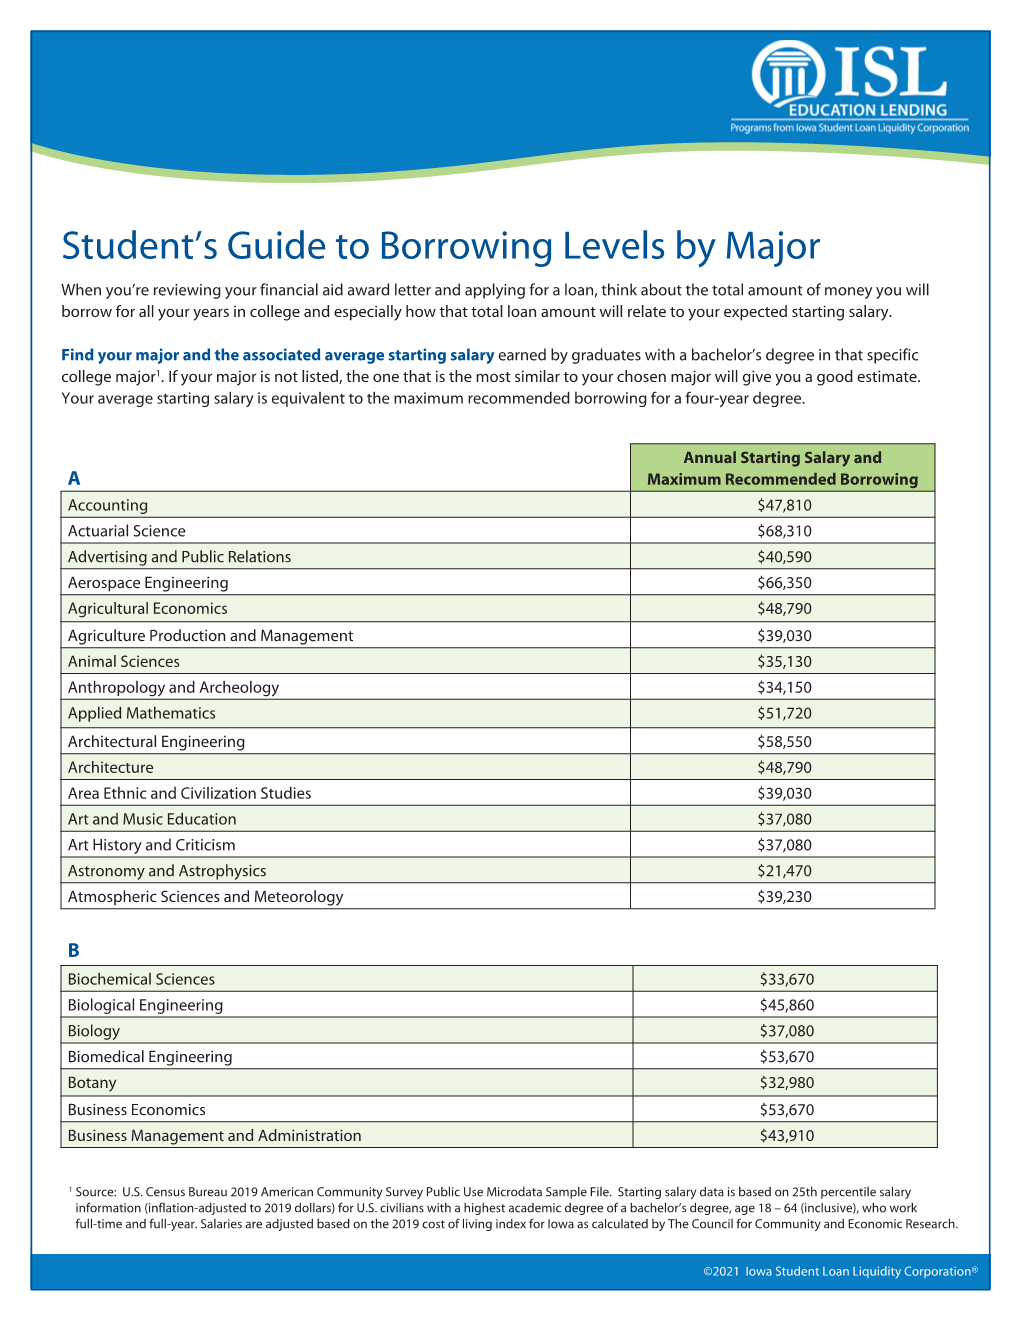 Student's Guide to Borrowing Levels by Major